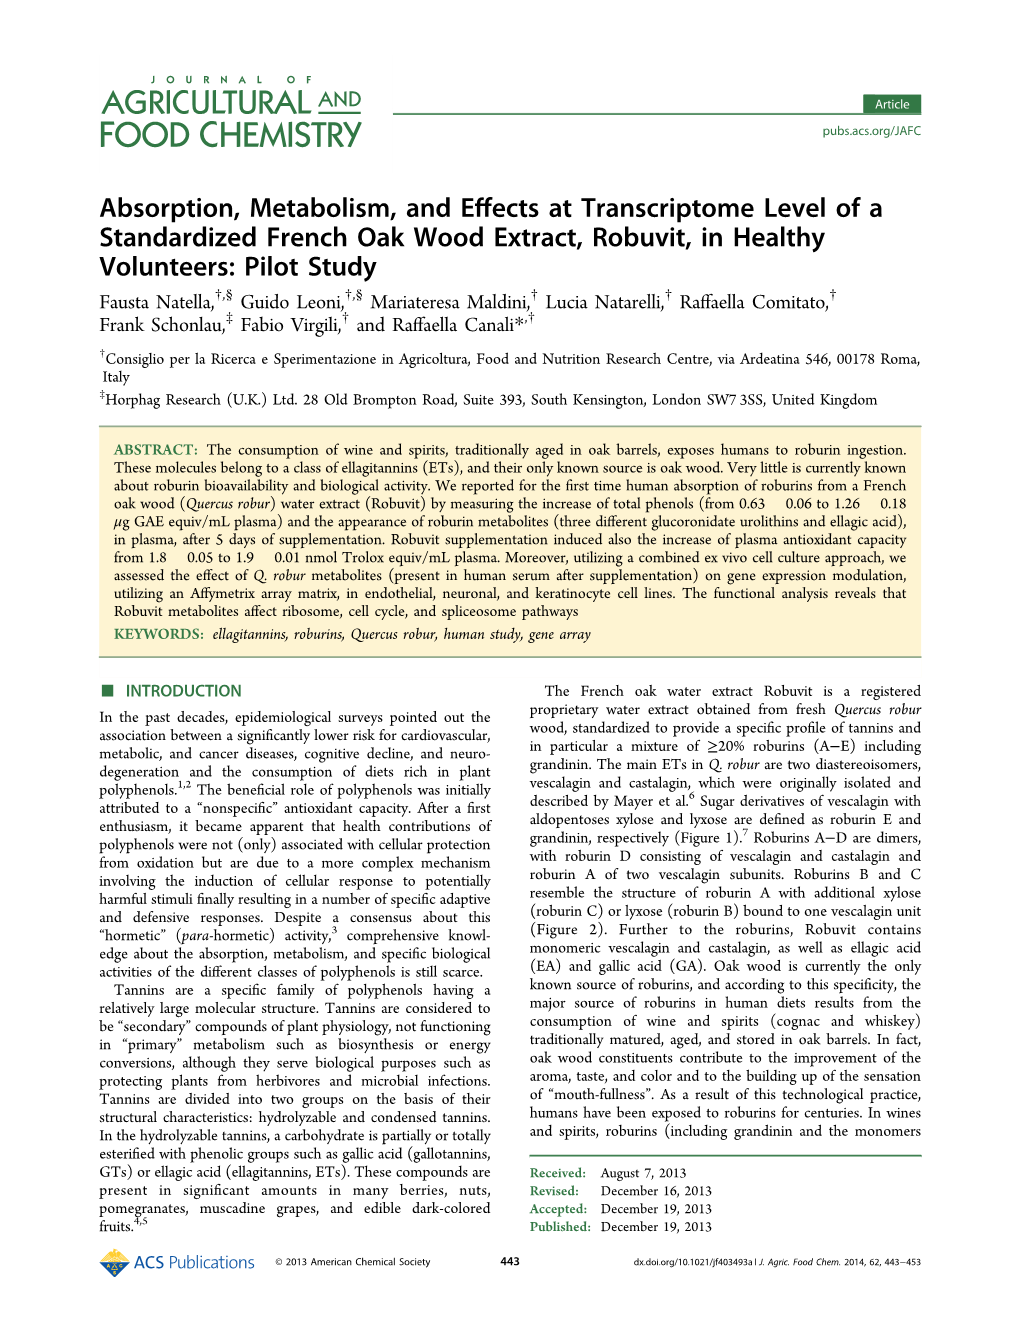 Absorption, Metabolism, and Effects at Transcriptome Level of A